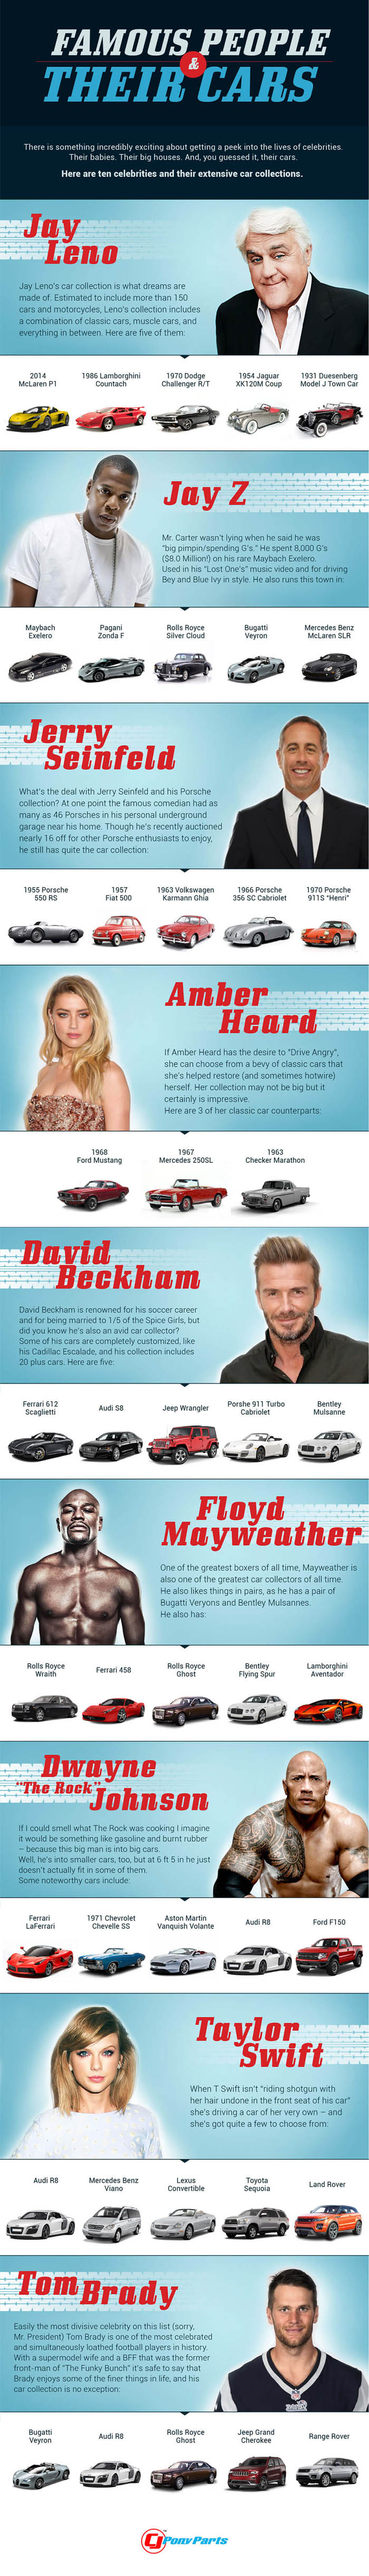 famous-people-and-their-cars-infographic-dailycarblog